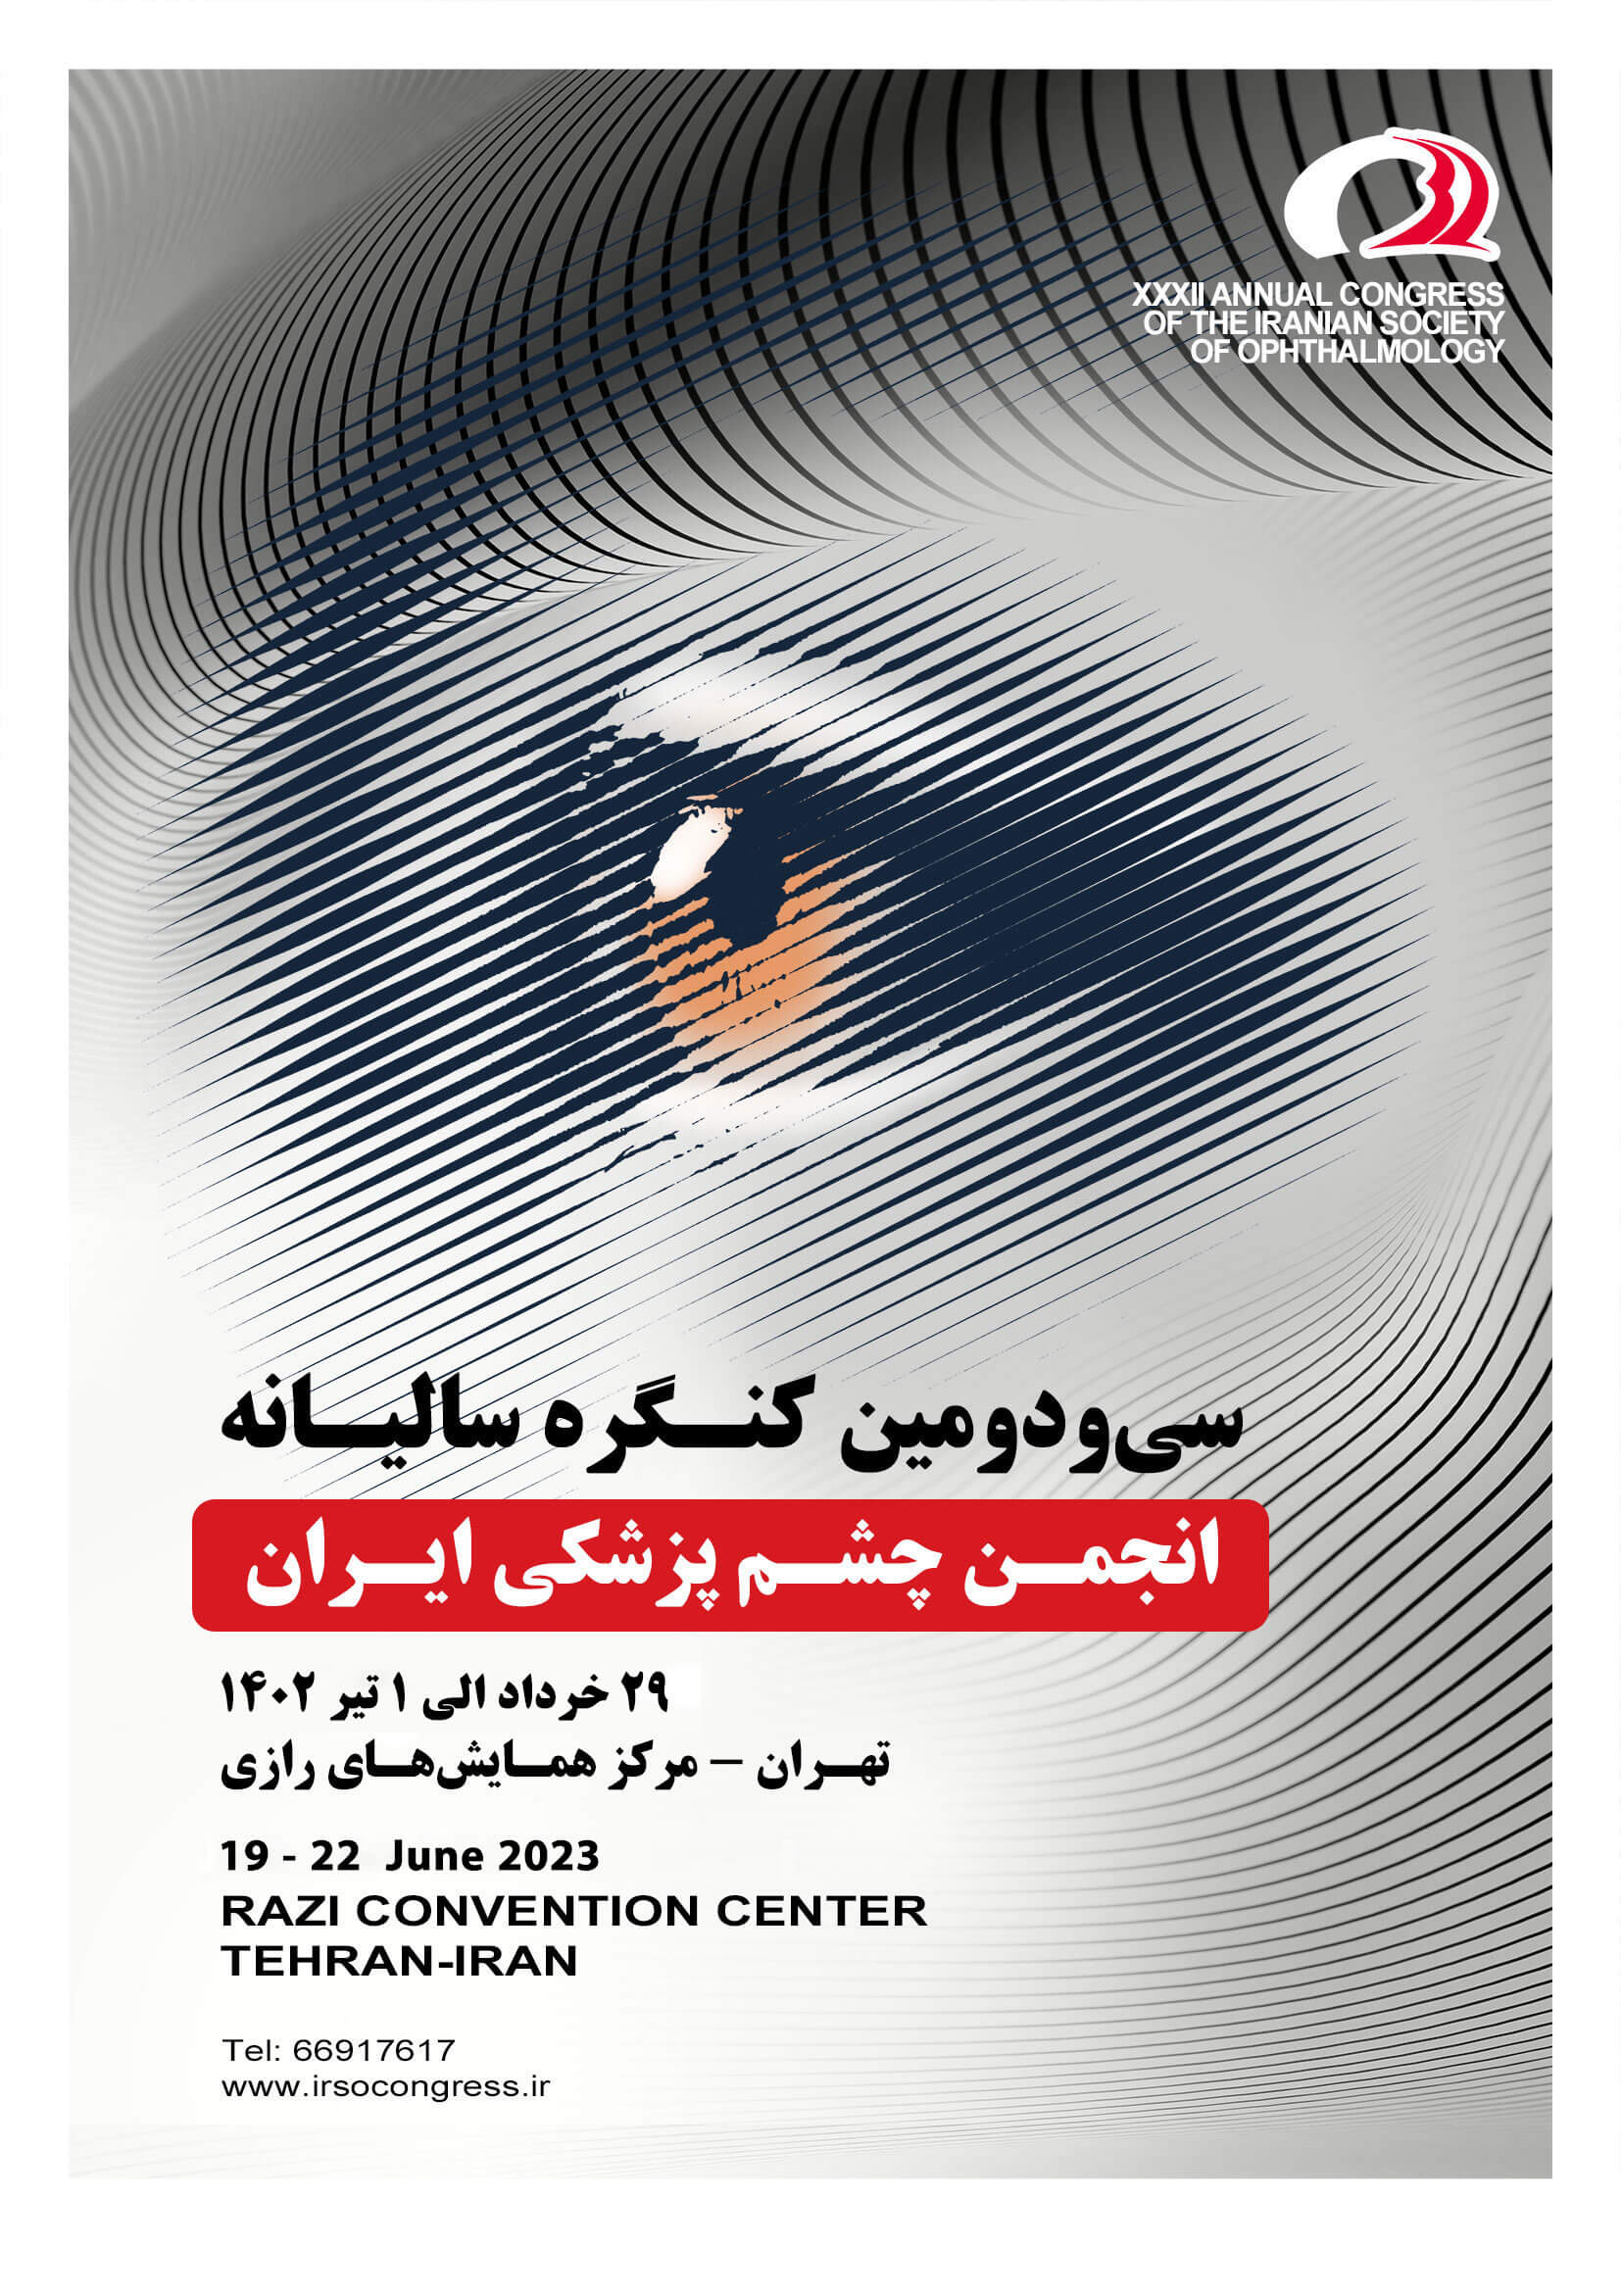 32nd annual congress of the Iranian Ophthalmology Association